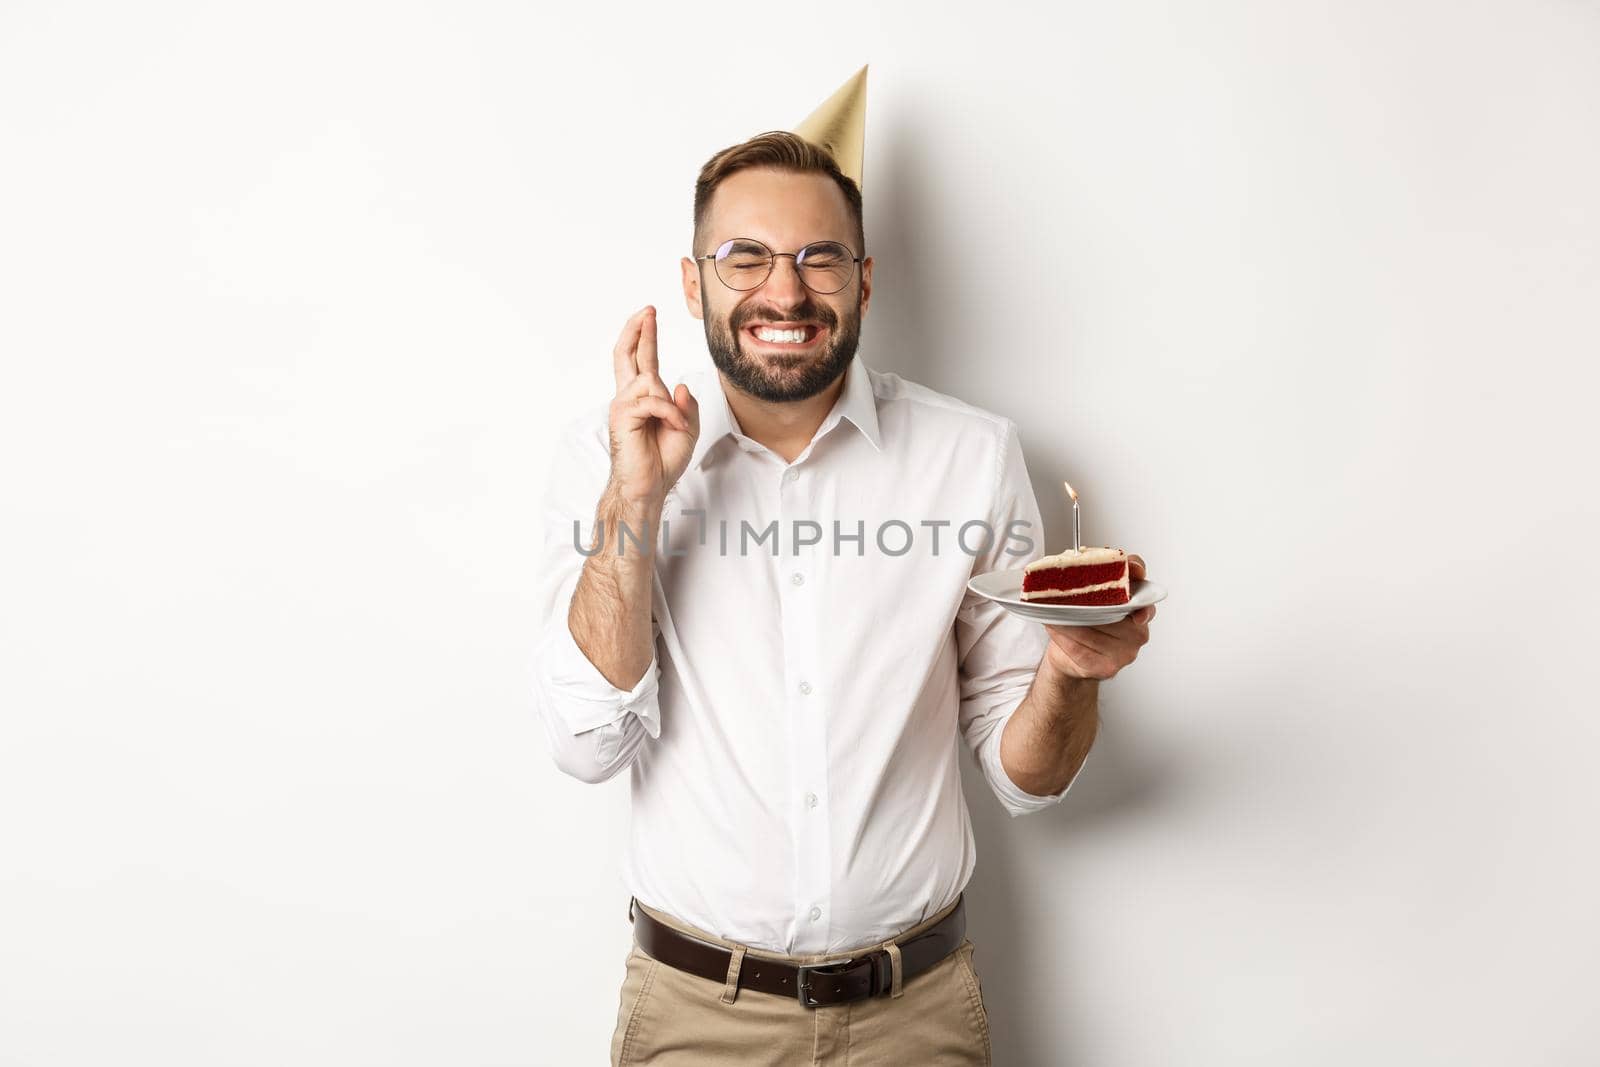 Holidays and celebration. Happy man making wish on birthday cake, cross fingers and smiling excited, having b-day party, white background.